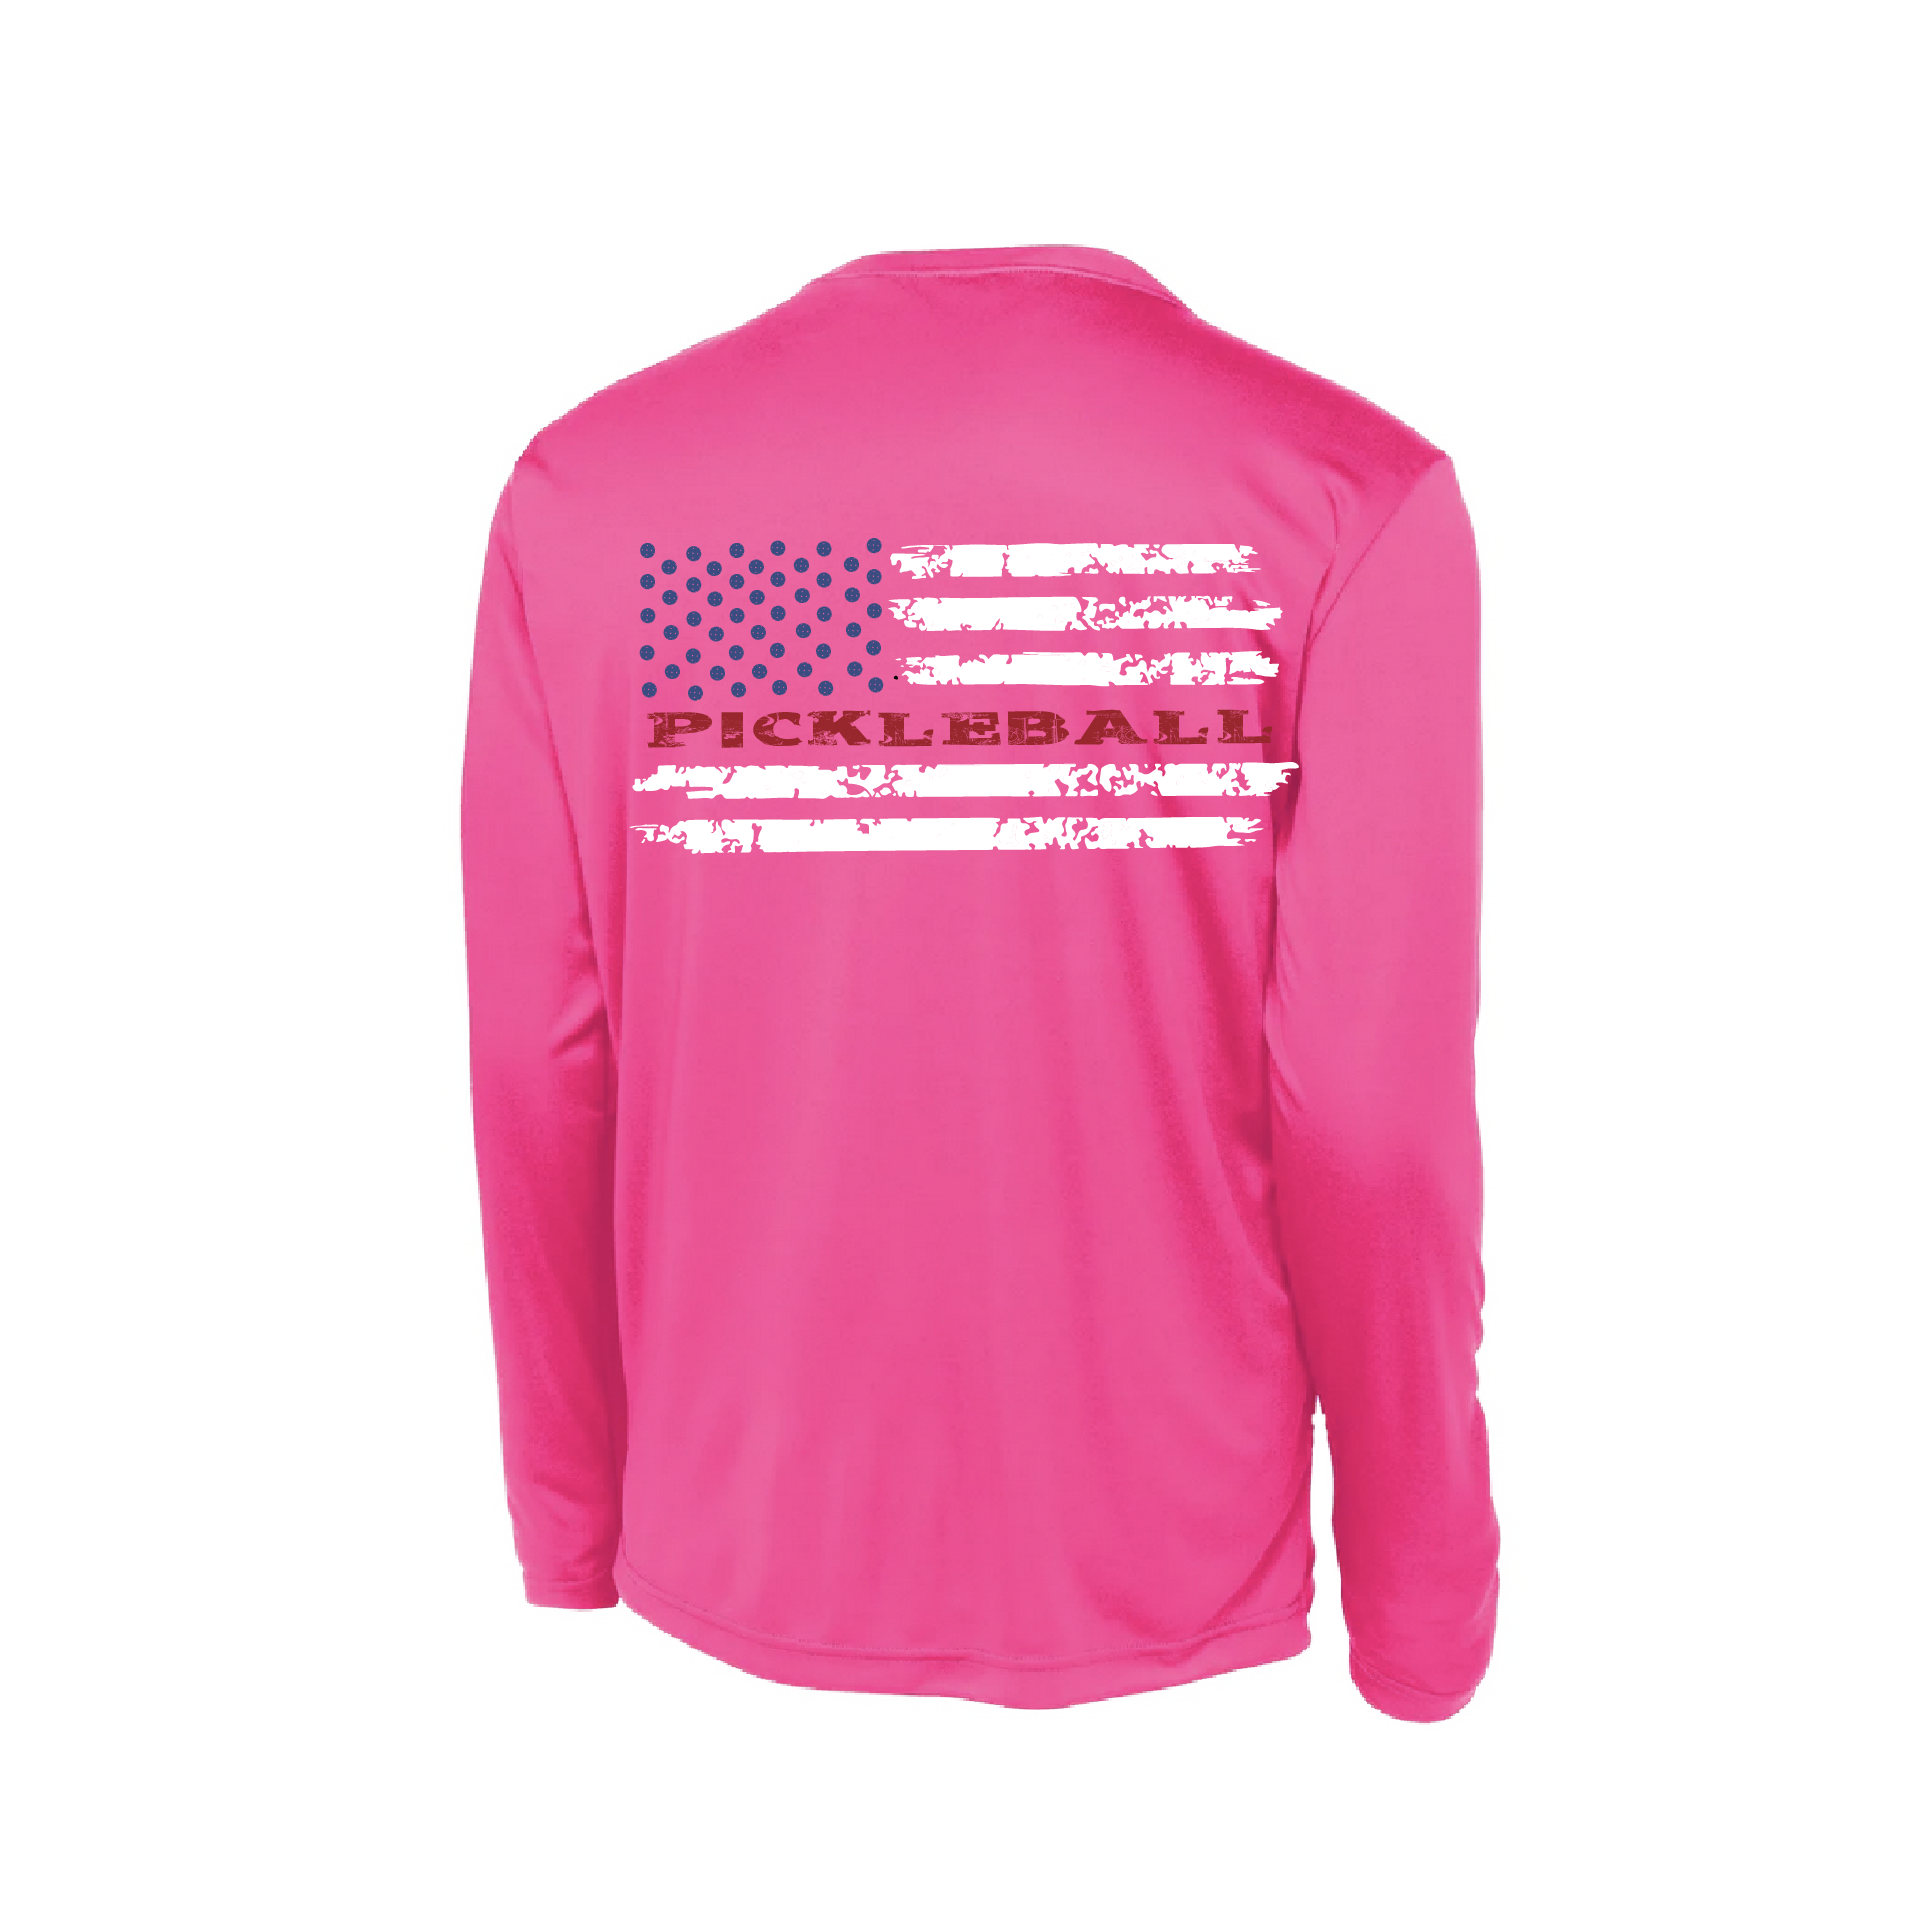 Pickleball Design: Pickleball Flag Horizontal on Front or Back of Shirt  Youth Style: Long Sleeve  Shirts are lightweight, roomy and highly breathable. These moisture-wicking shirts are designed for athletic performance. They feature PosiCharge technology to lock in color and prevent logos from fading. Removable tag and set-in sleeves for comfort.